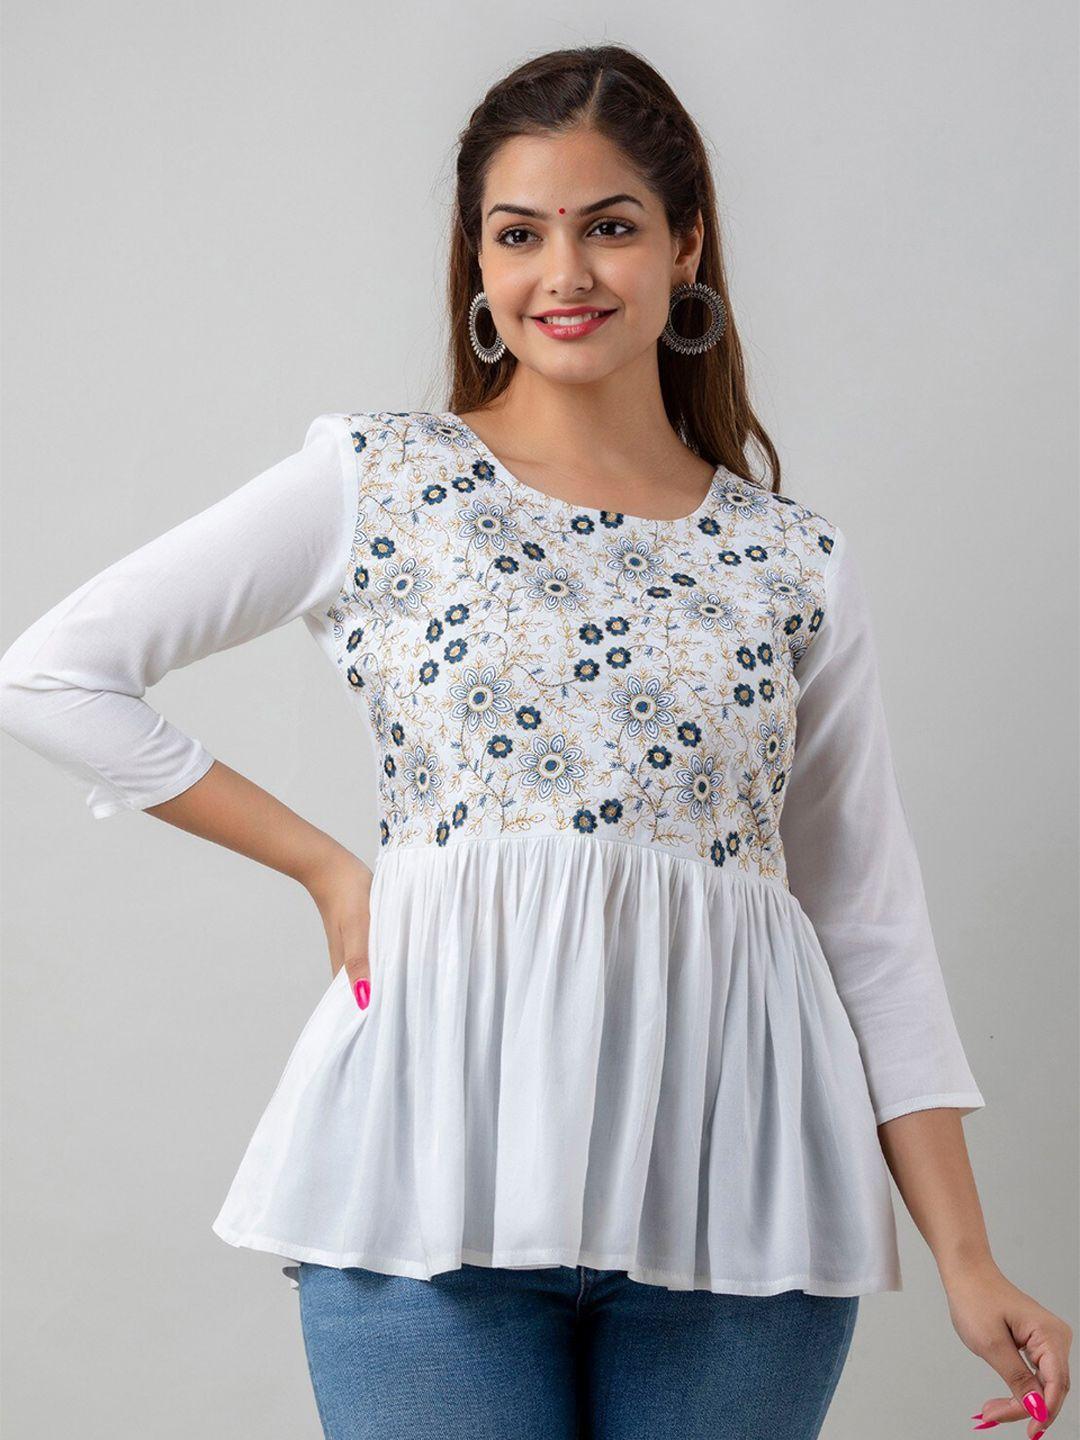 women-touch-floral-embroidered-round-neck-top